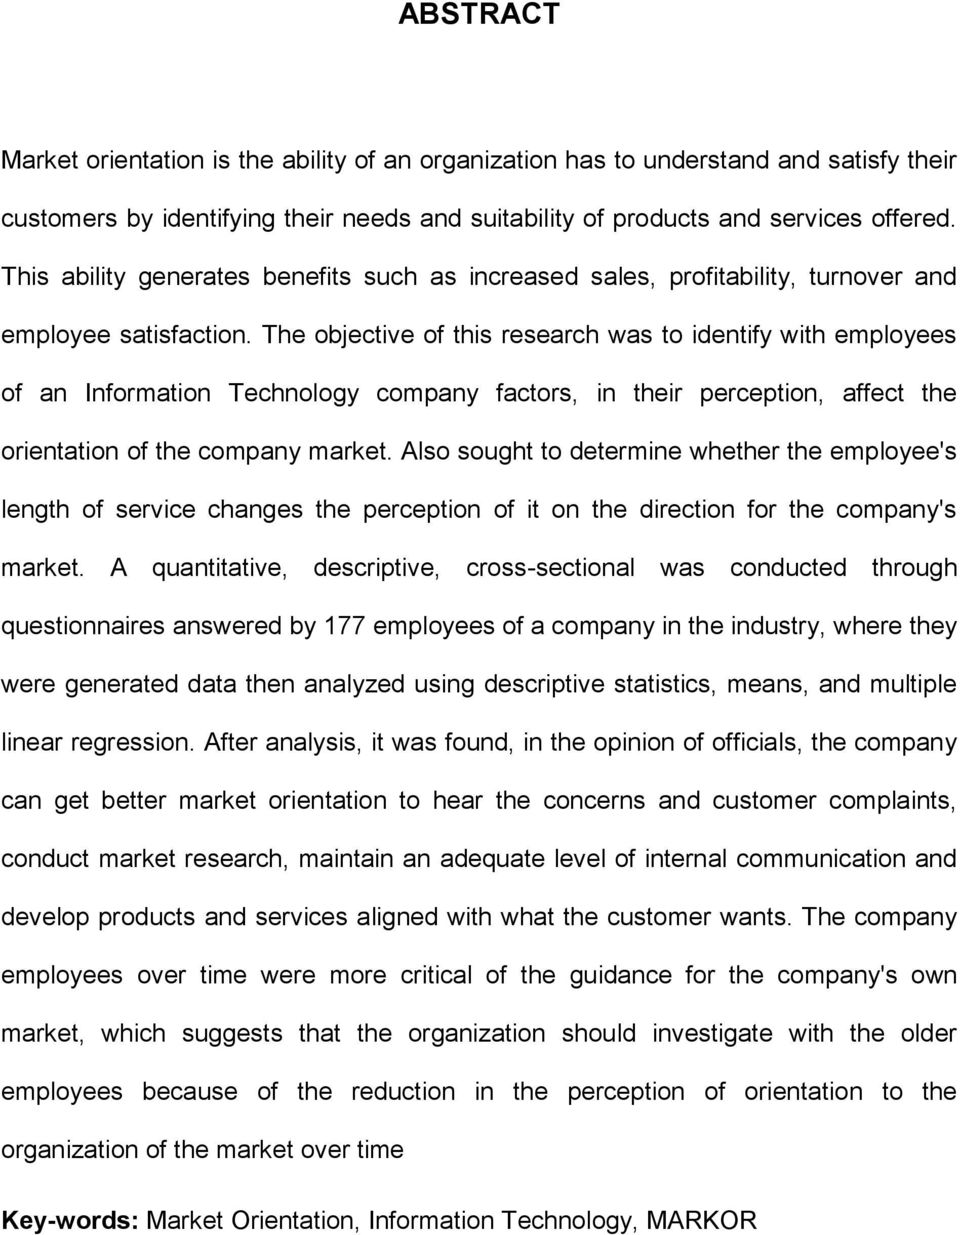 The objective of this research was to identify with employees of an Information Technology company factors, in their perception, affect the orientation of the company market.